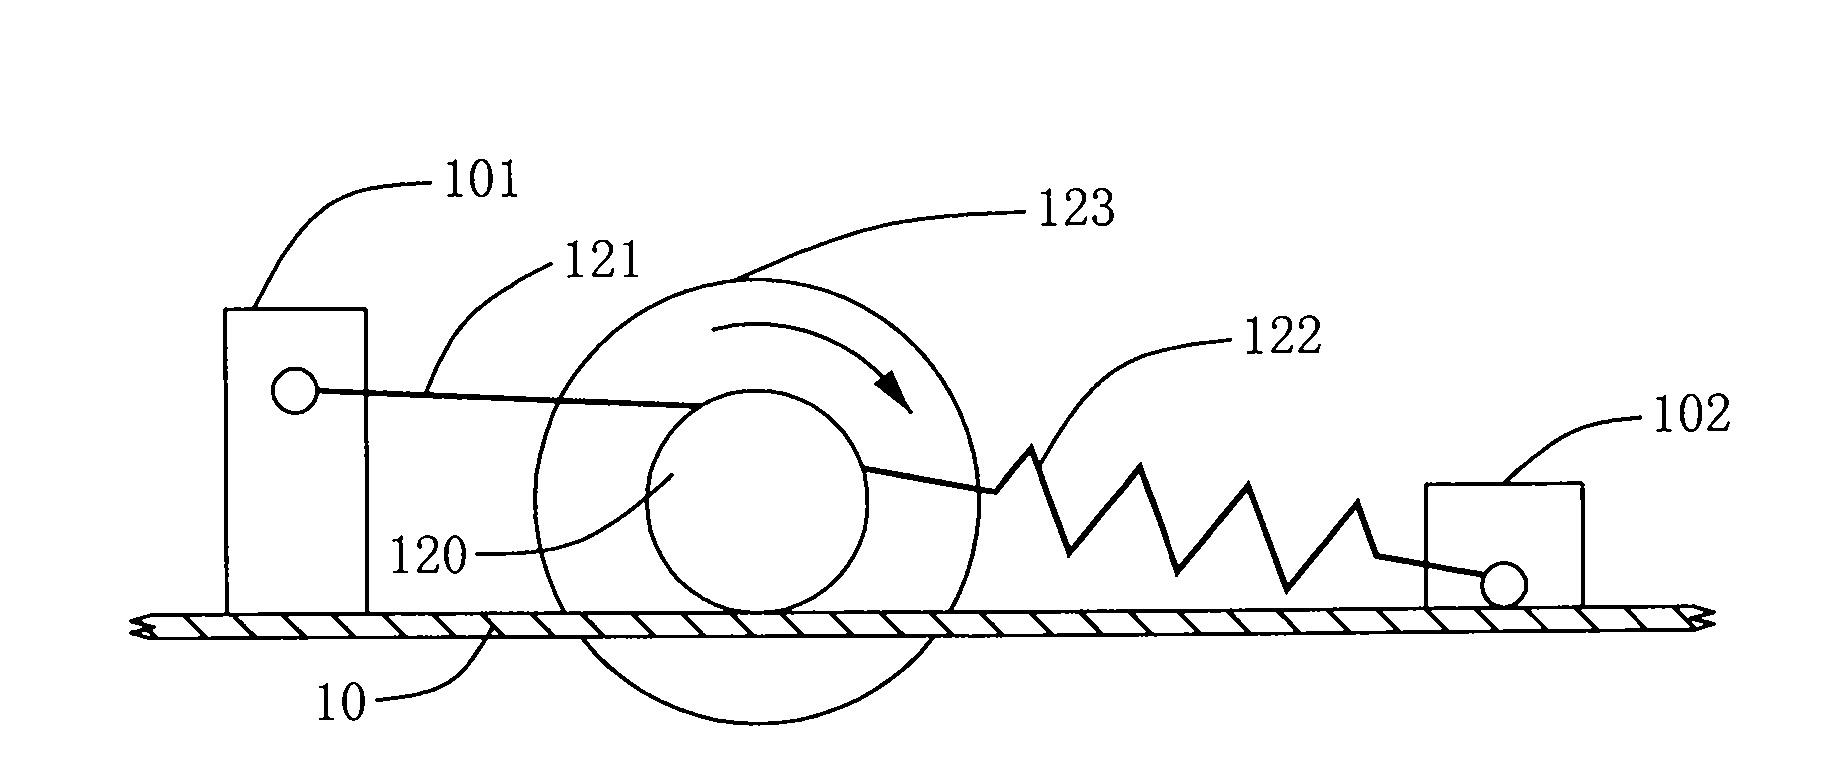 Self-propelled cleaning device